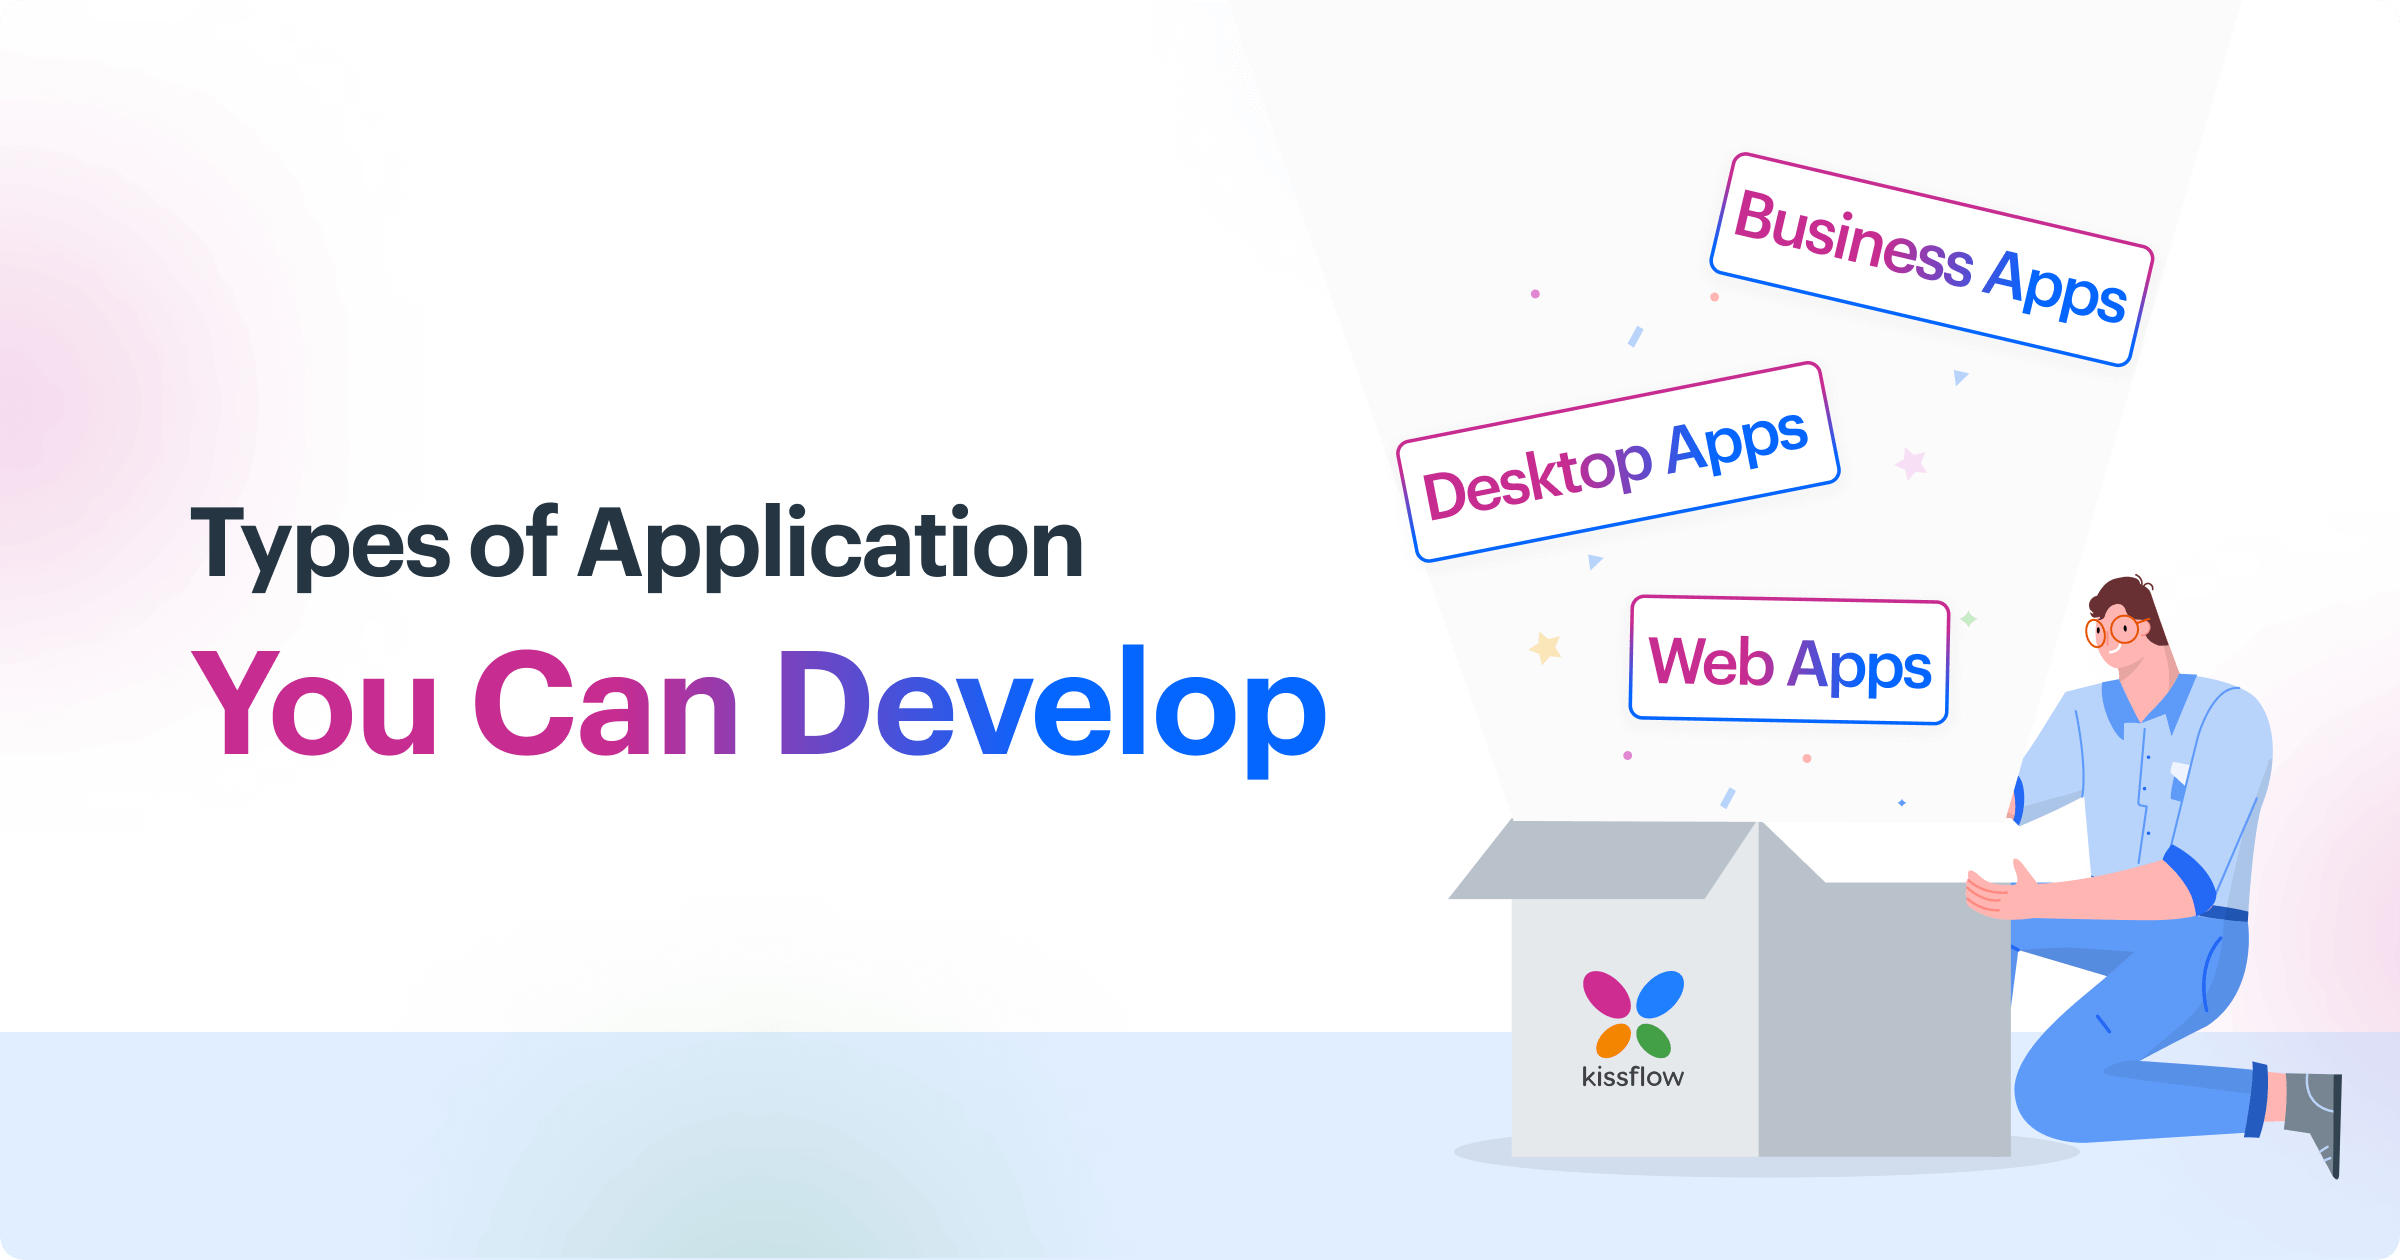 Types of apps you can develop